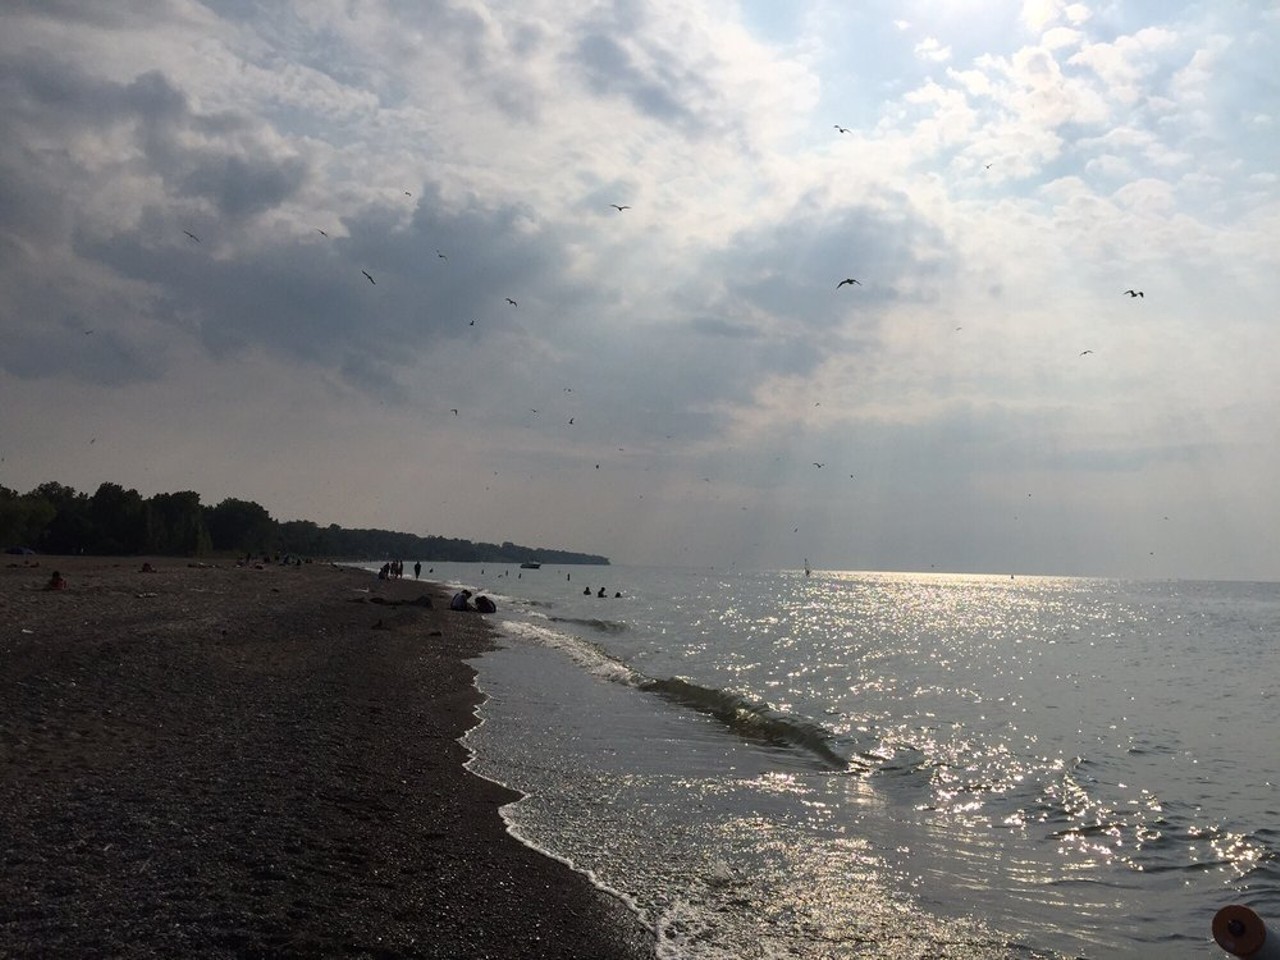 Headlands Beach State Park - Located in Mentor, it is the longest natural beach in the state of Ohio. Head on over for a pleasant afternoon in the sun.